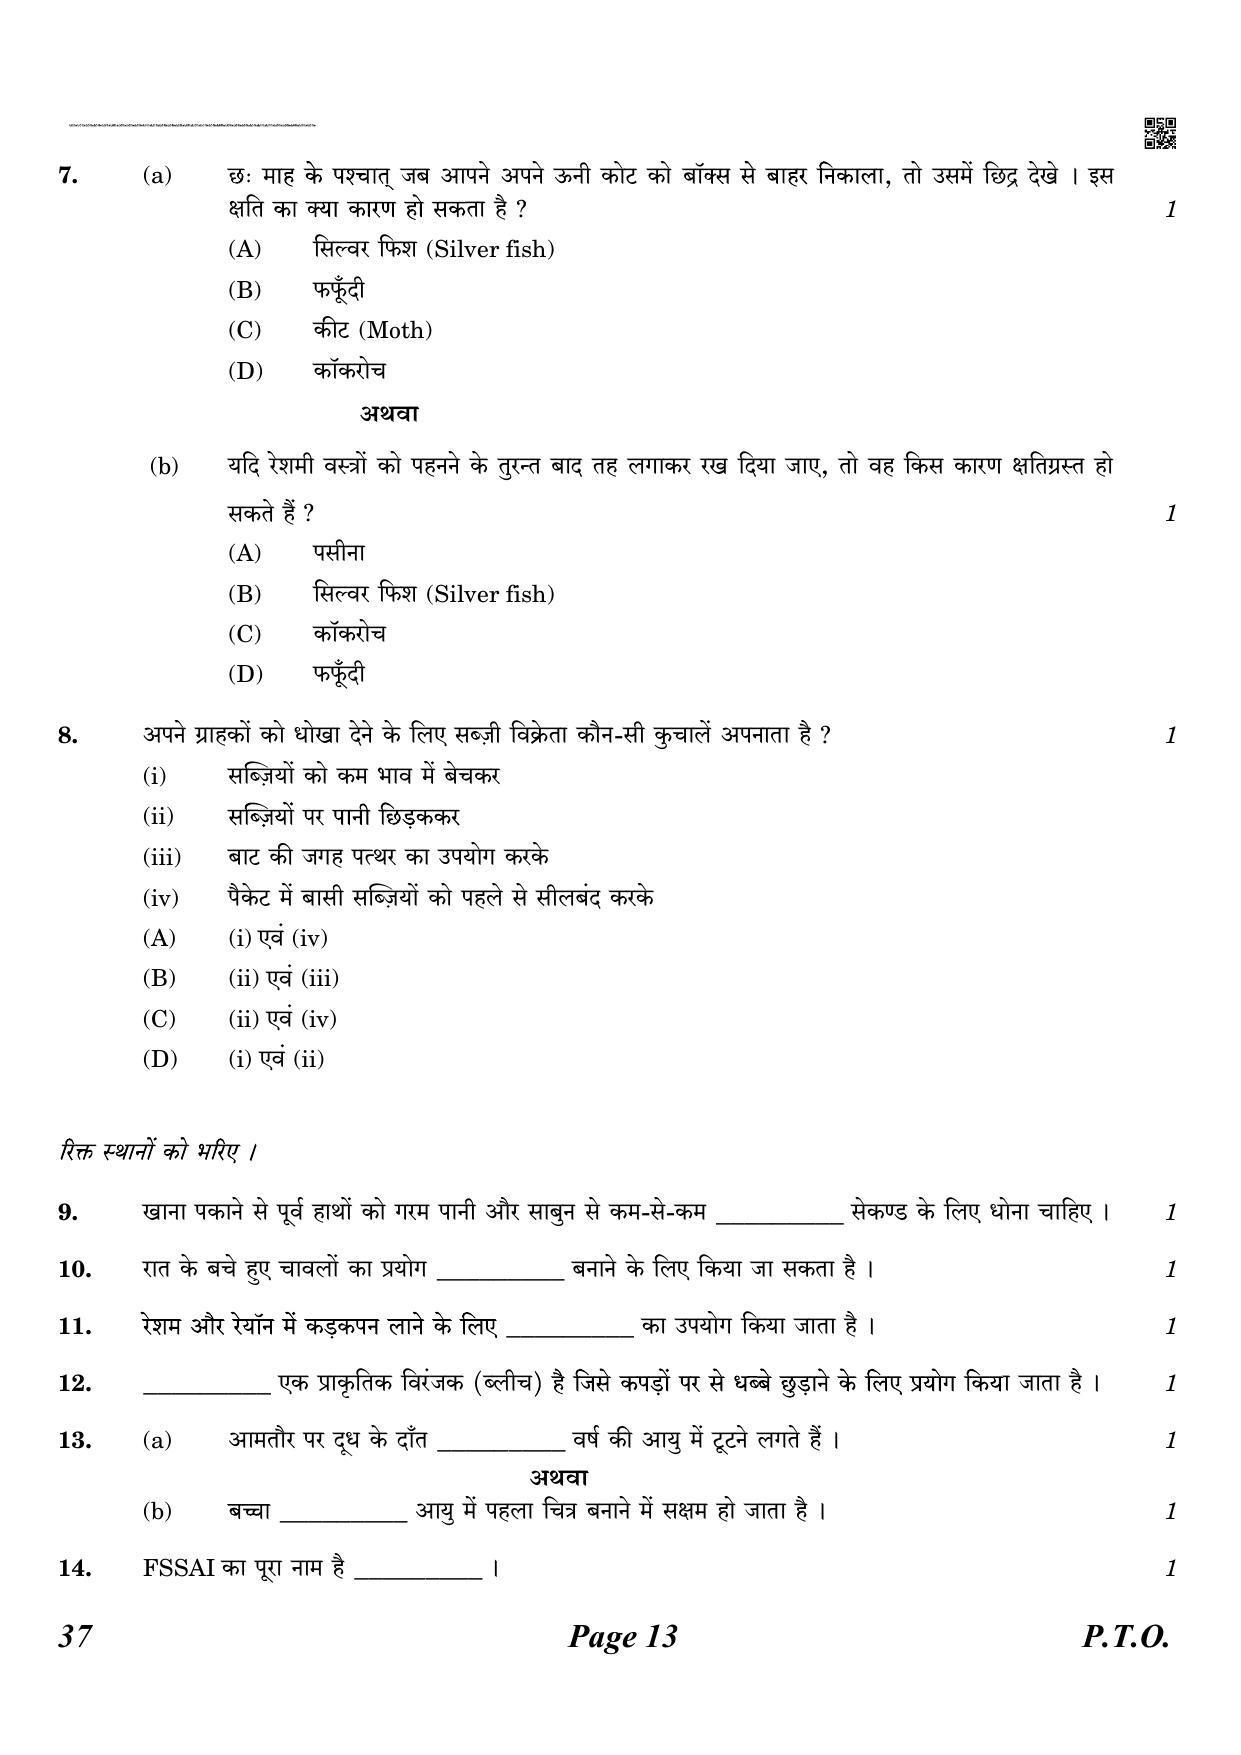 CBSE Class 10 QP_064_Home_Science 2021 Compartment Question Paper - Page 13